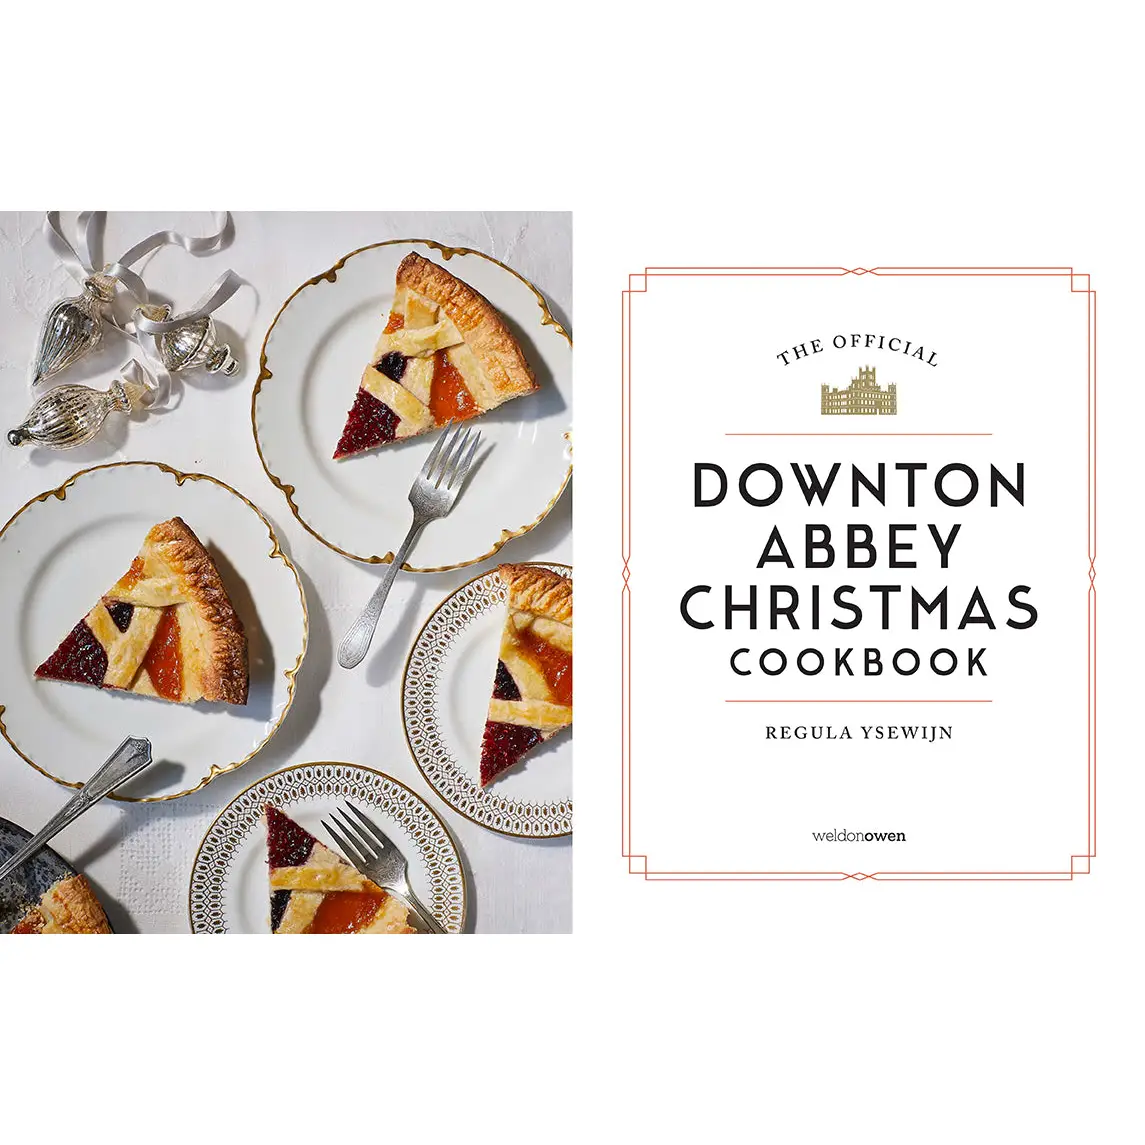 The Canton Christmas Shop The official downtown abbey PBS TV series Christmas cookbook